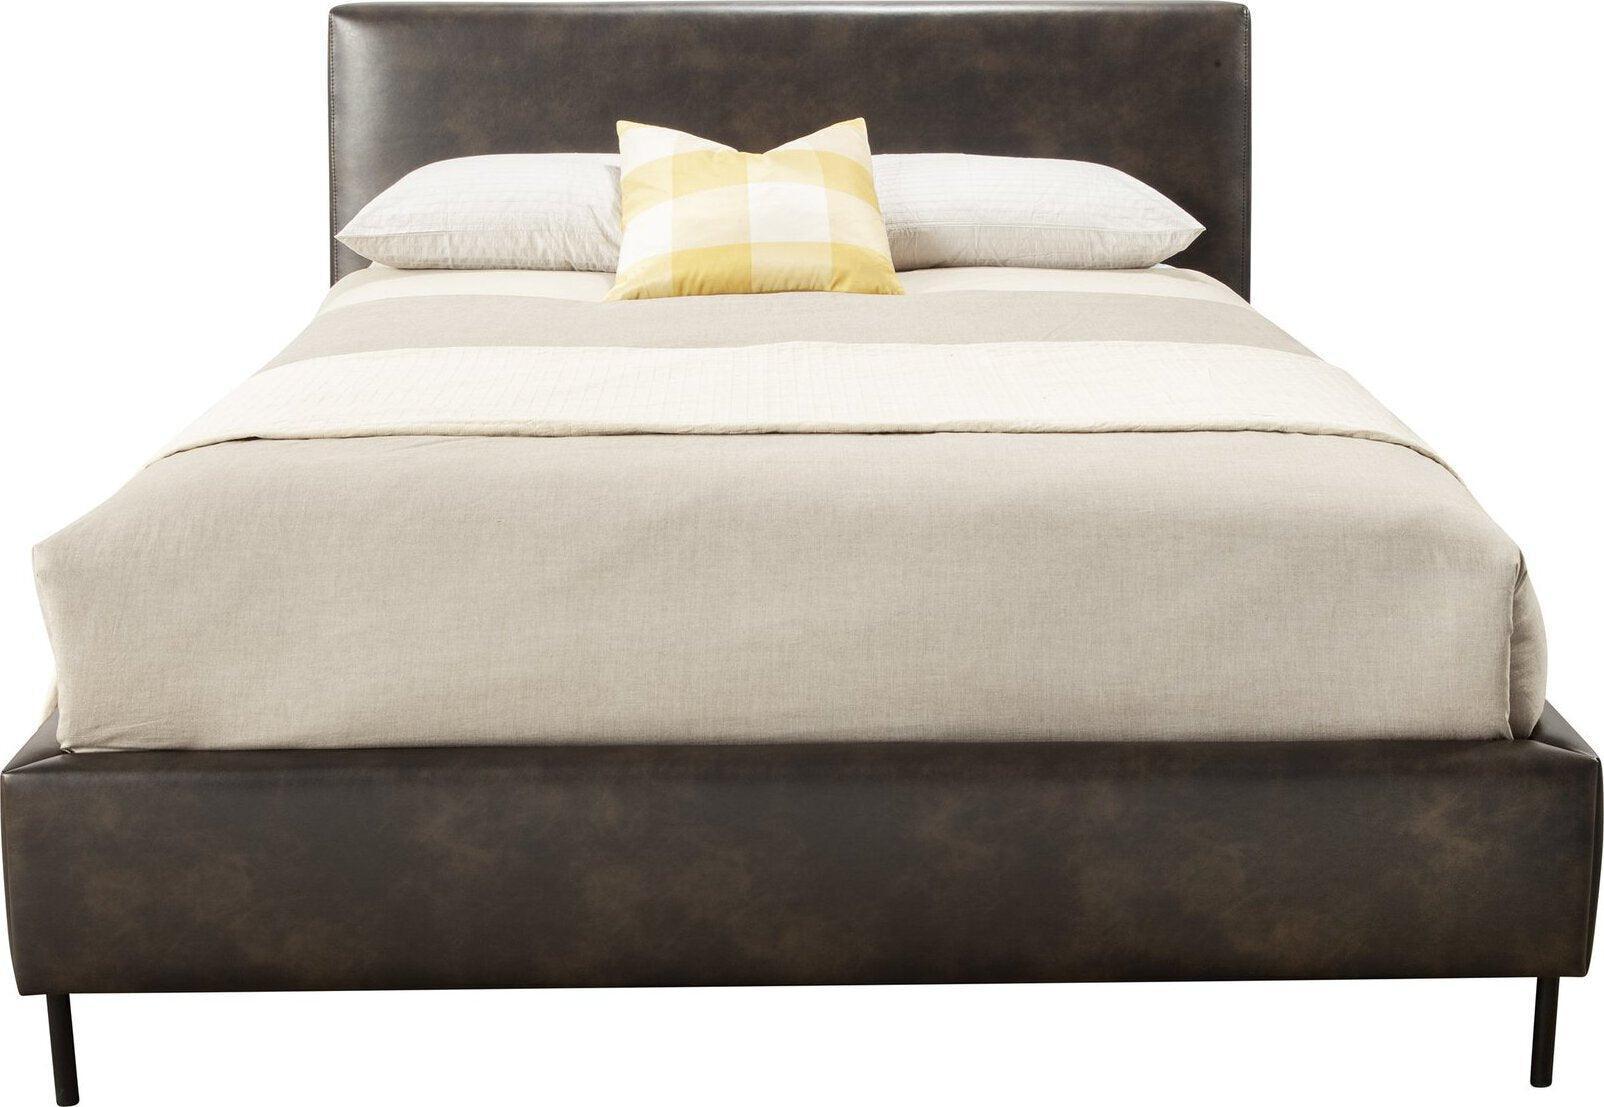 Alpine Furniture Beds - Sophia Faux Leather California King Bed Gray